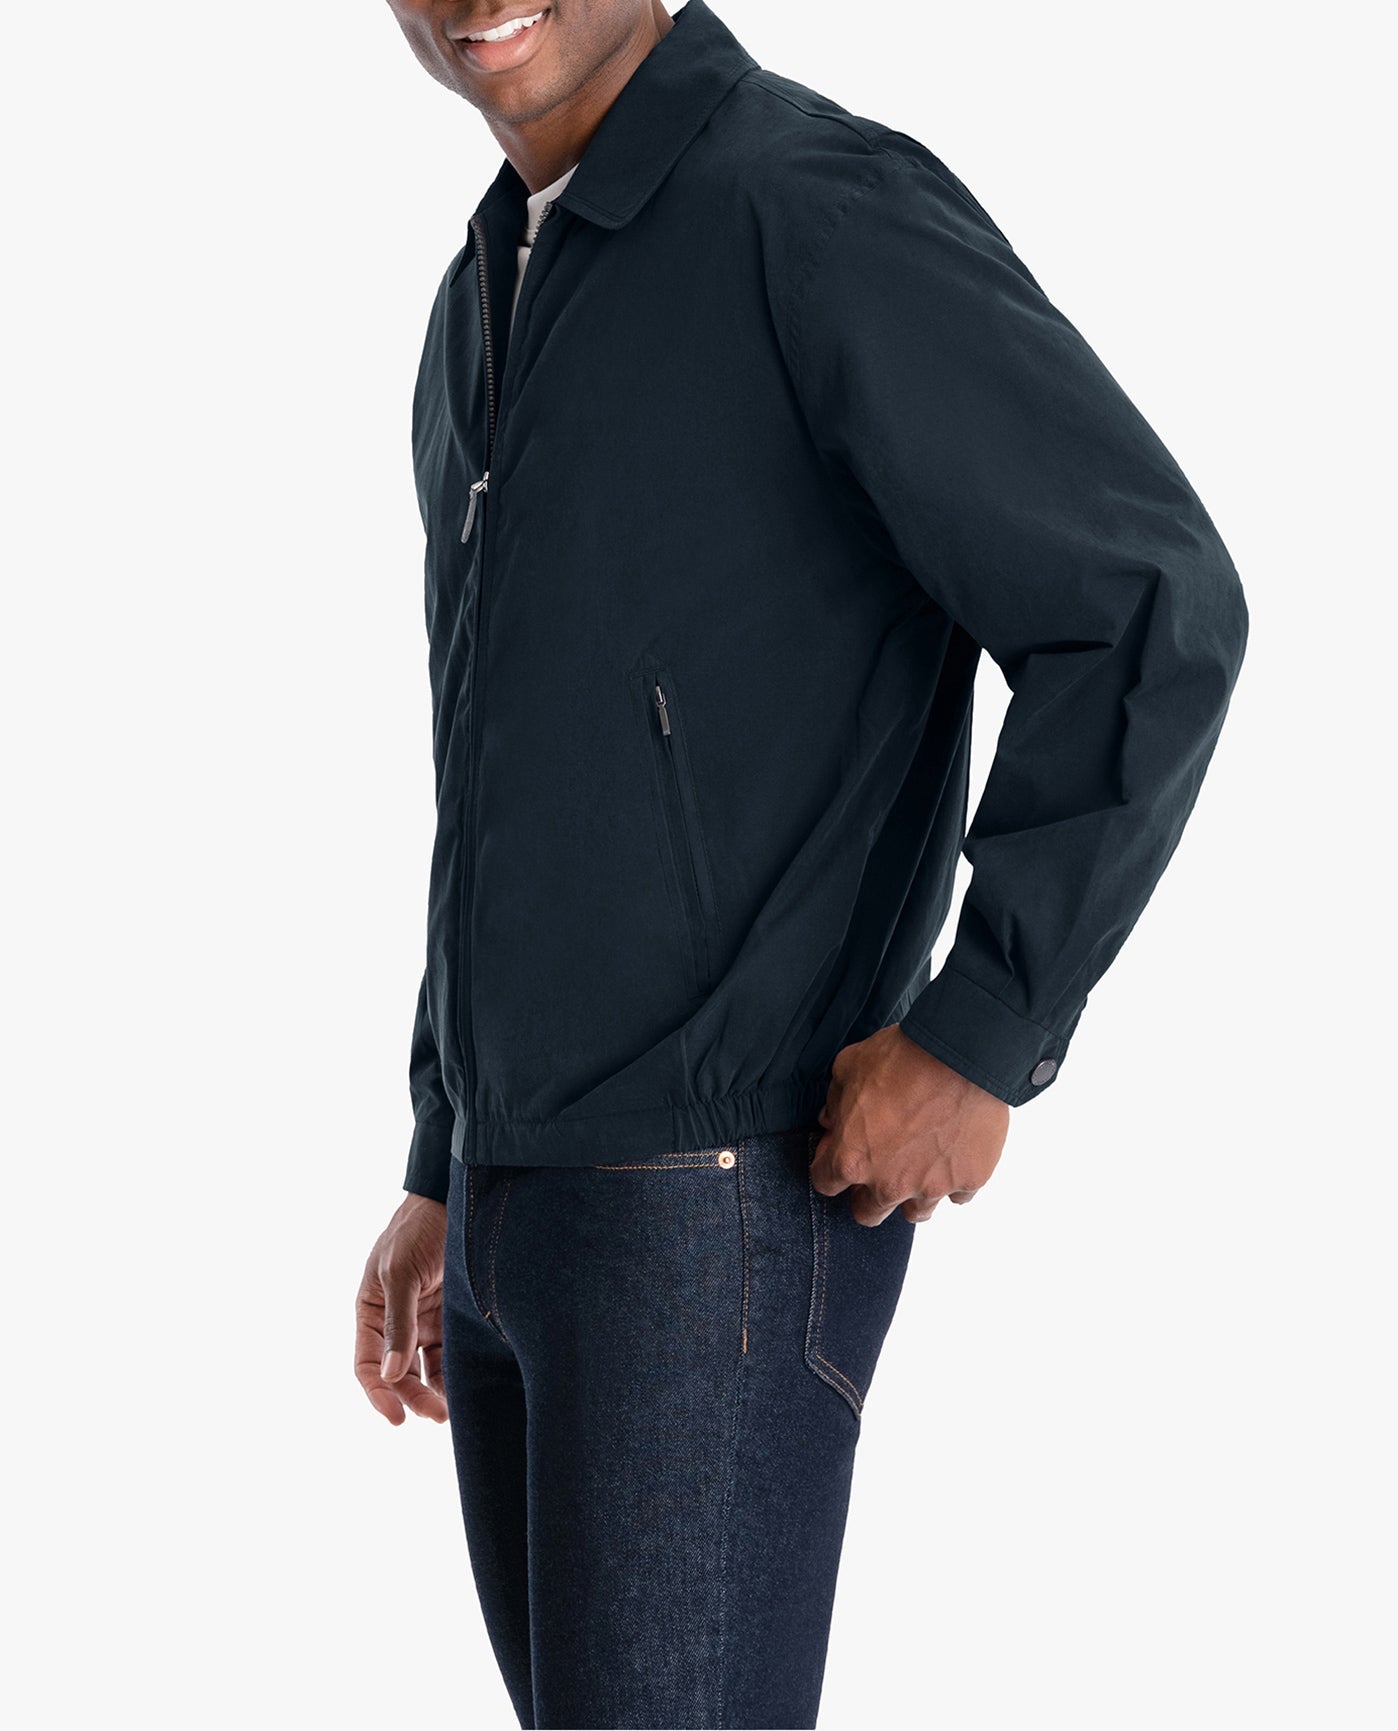 BACK VIEW OF EXTENDED LIGHT WEIGHT ZIP FRONT GOLF JACKET | NAVY